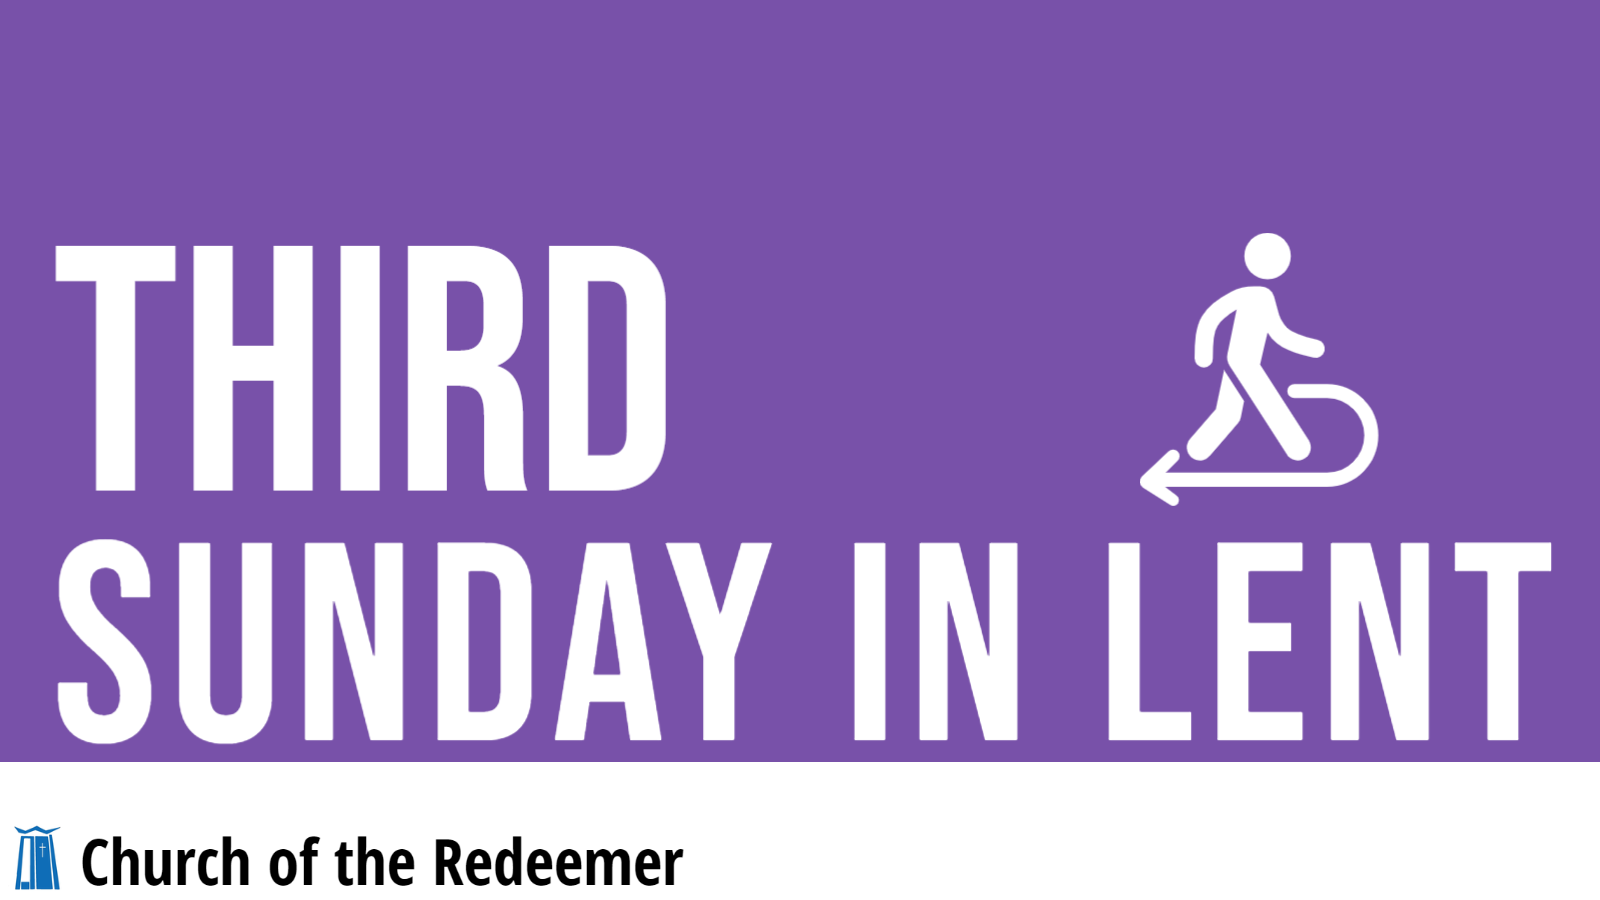 The 3rd Sunday in Lent